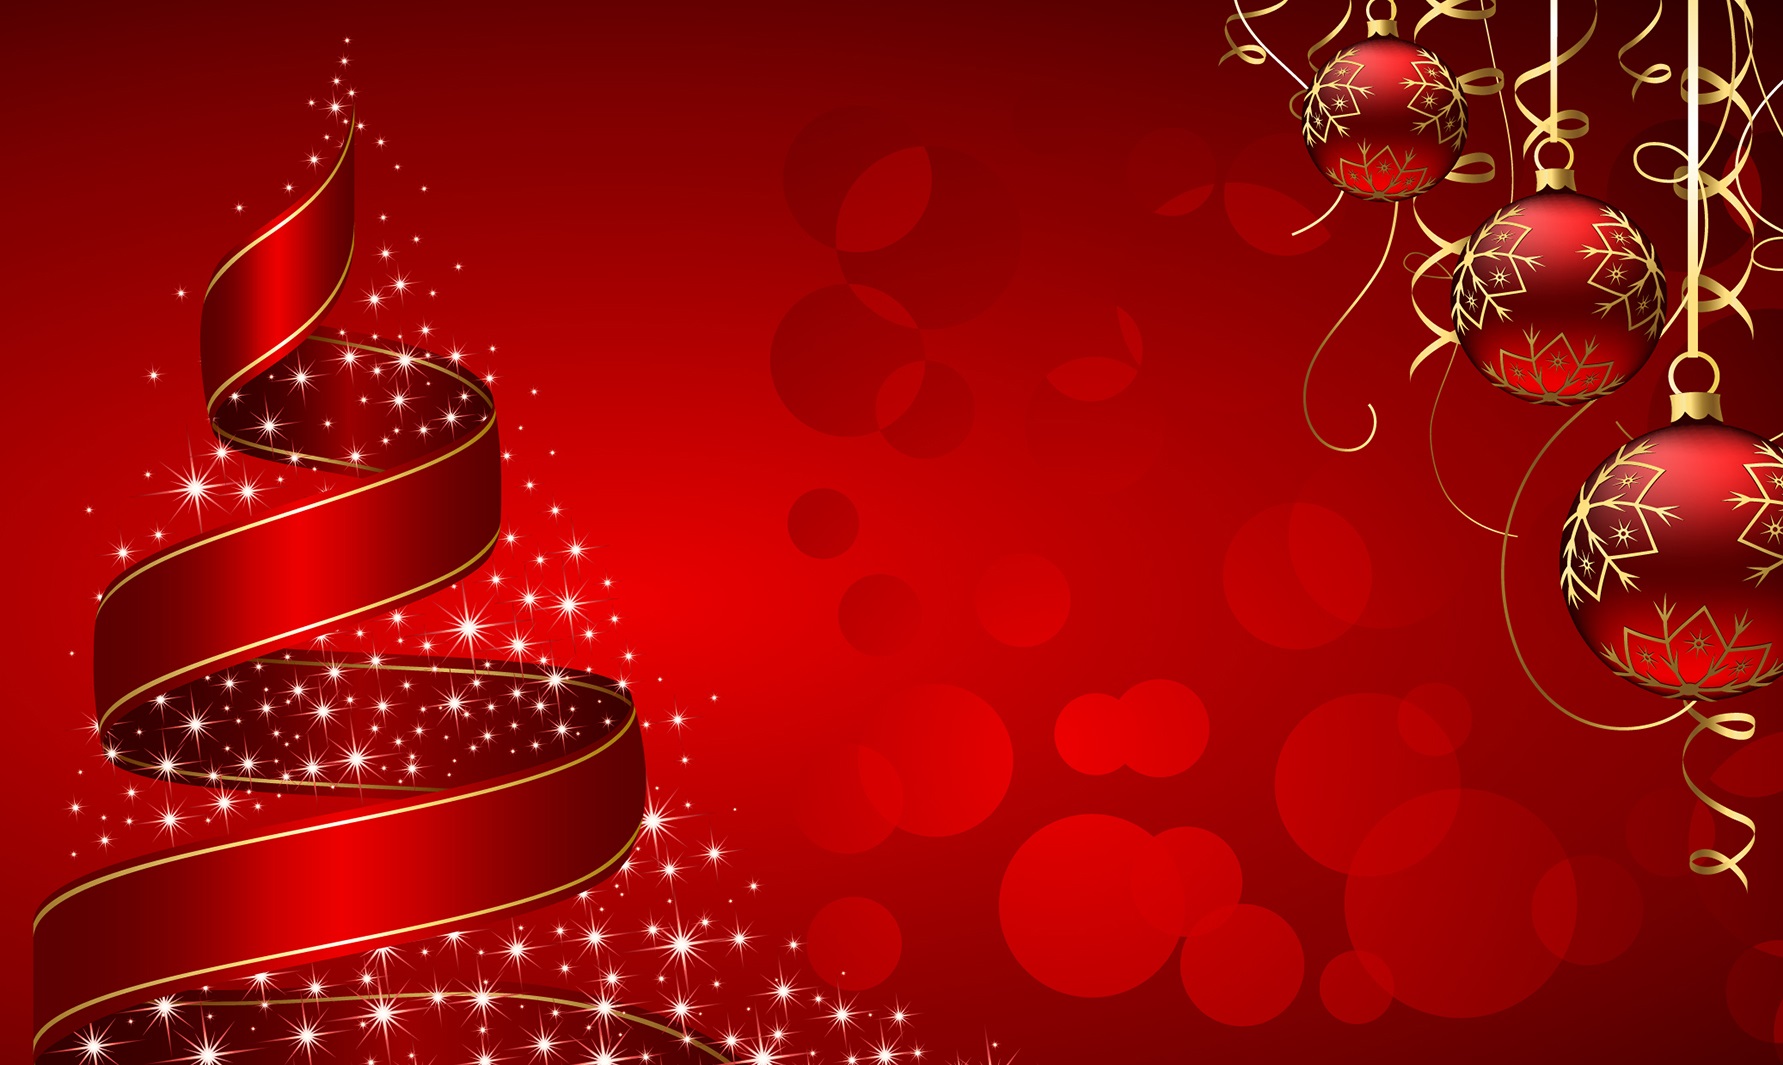 Merry Christmas Background HD Wallpaper Pulse